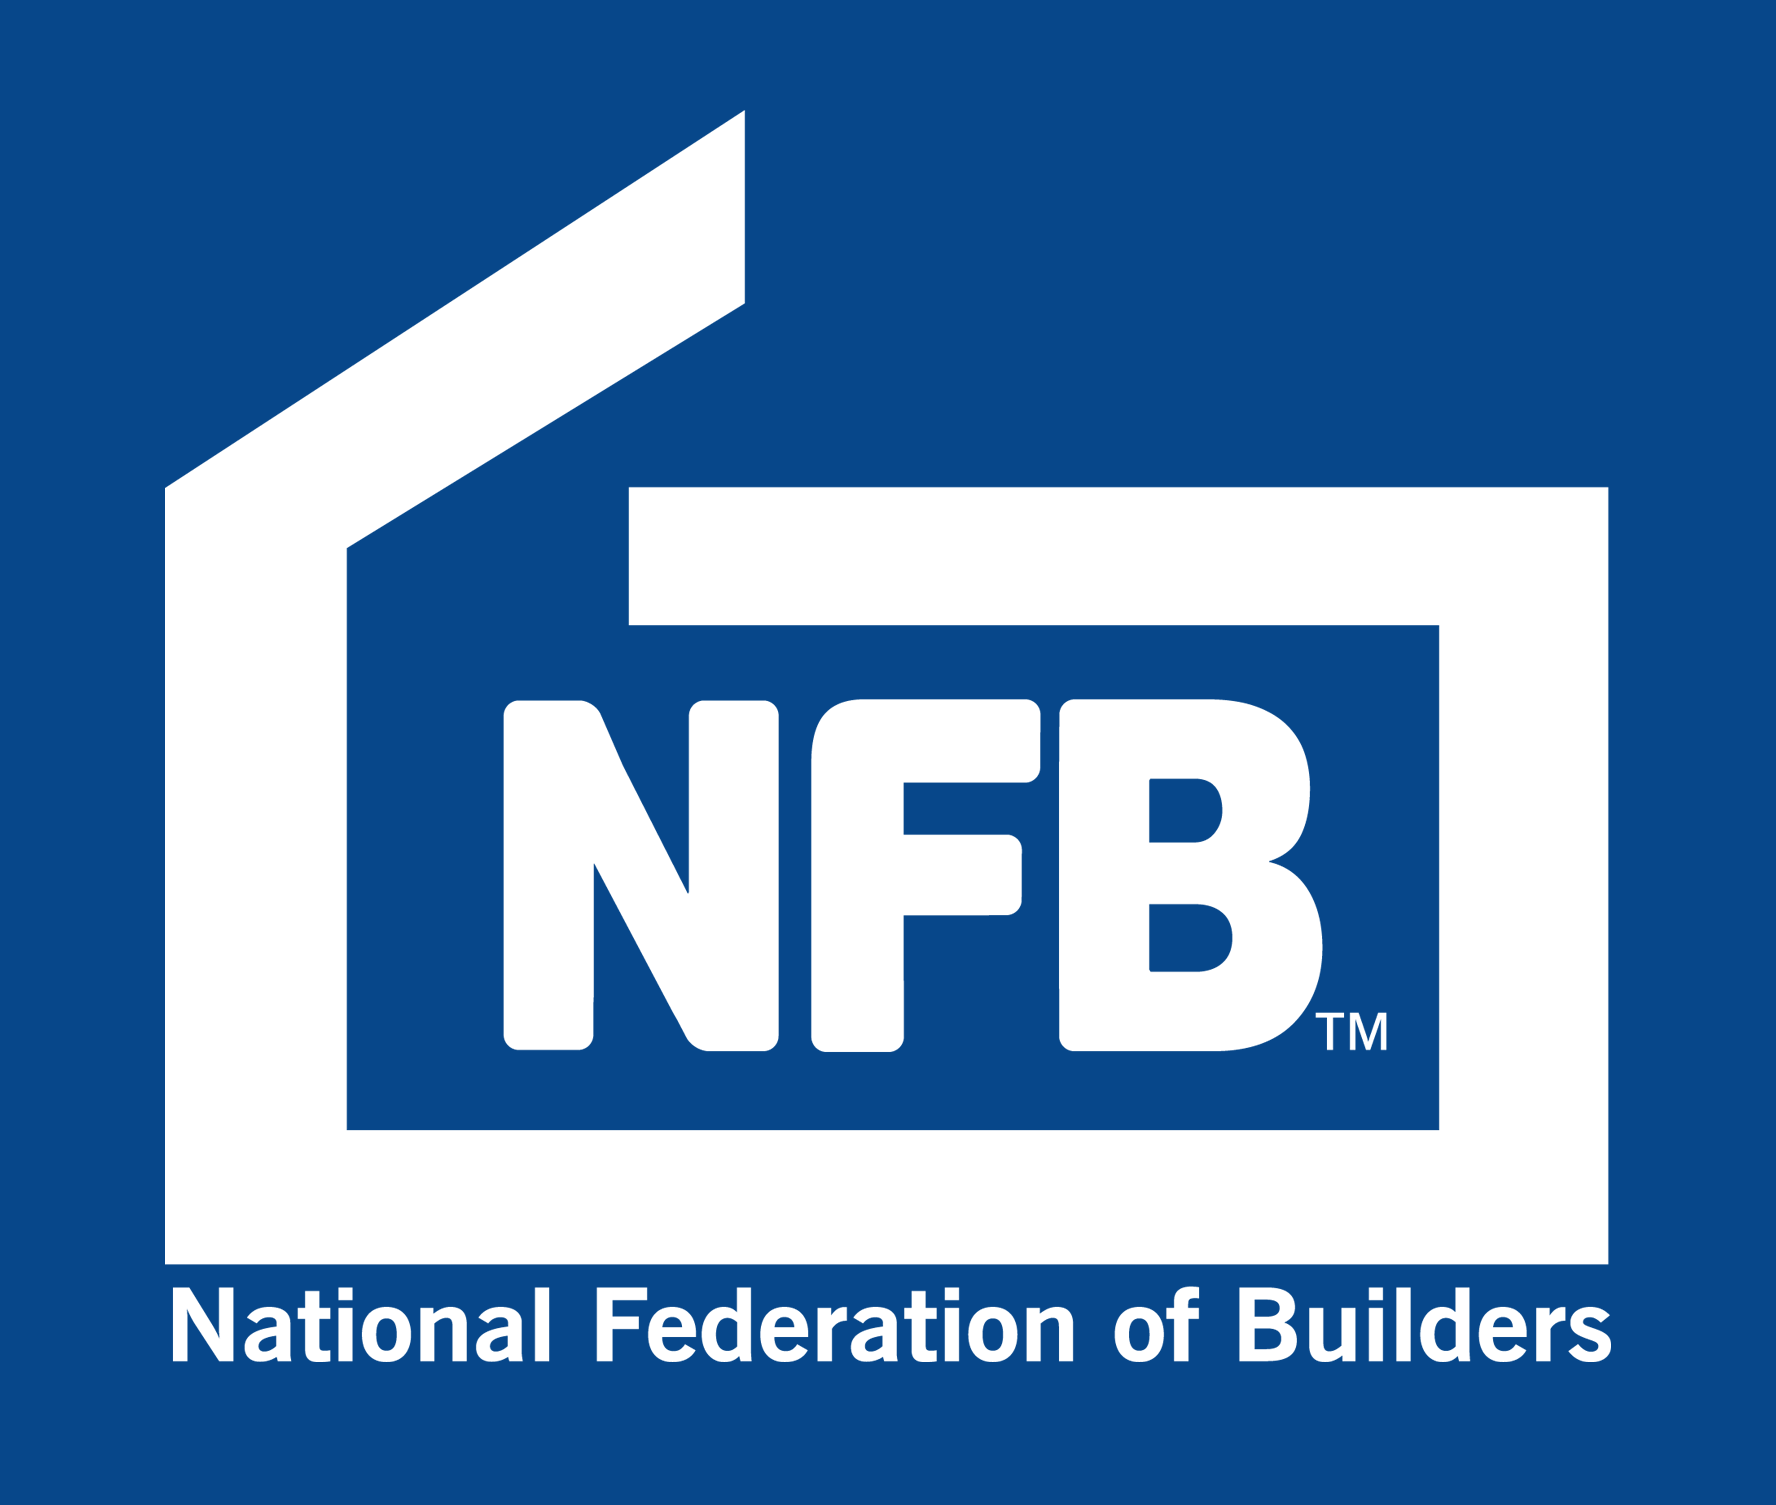 National Federation of Builders (NFB)